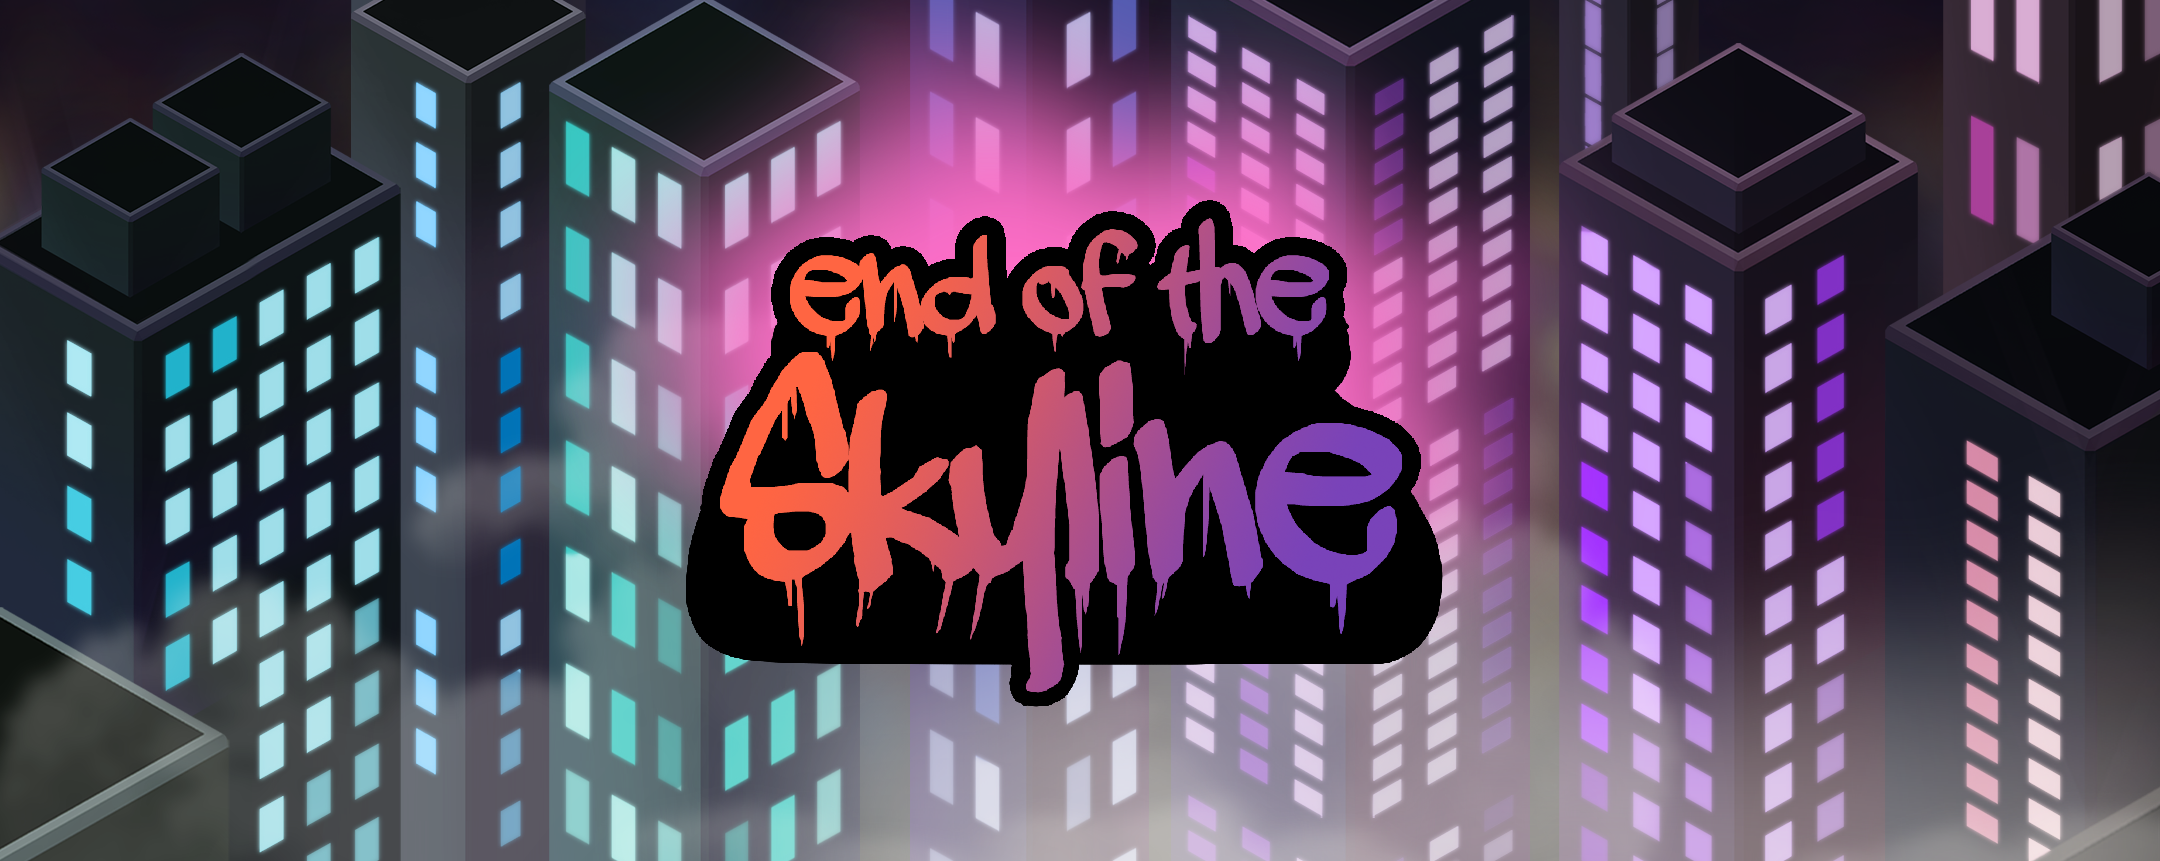 End of the Skyline